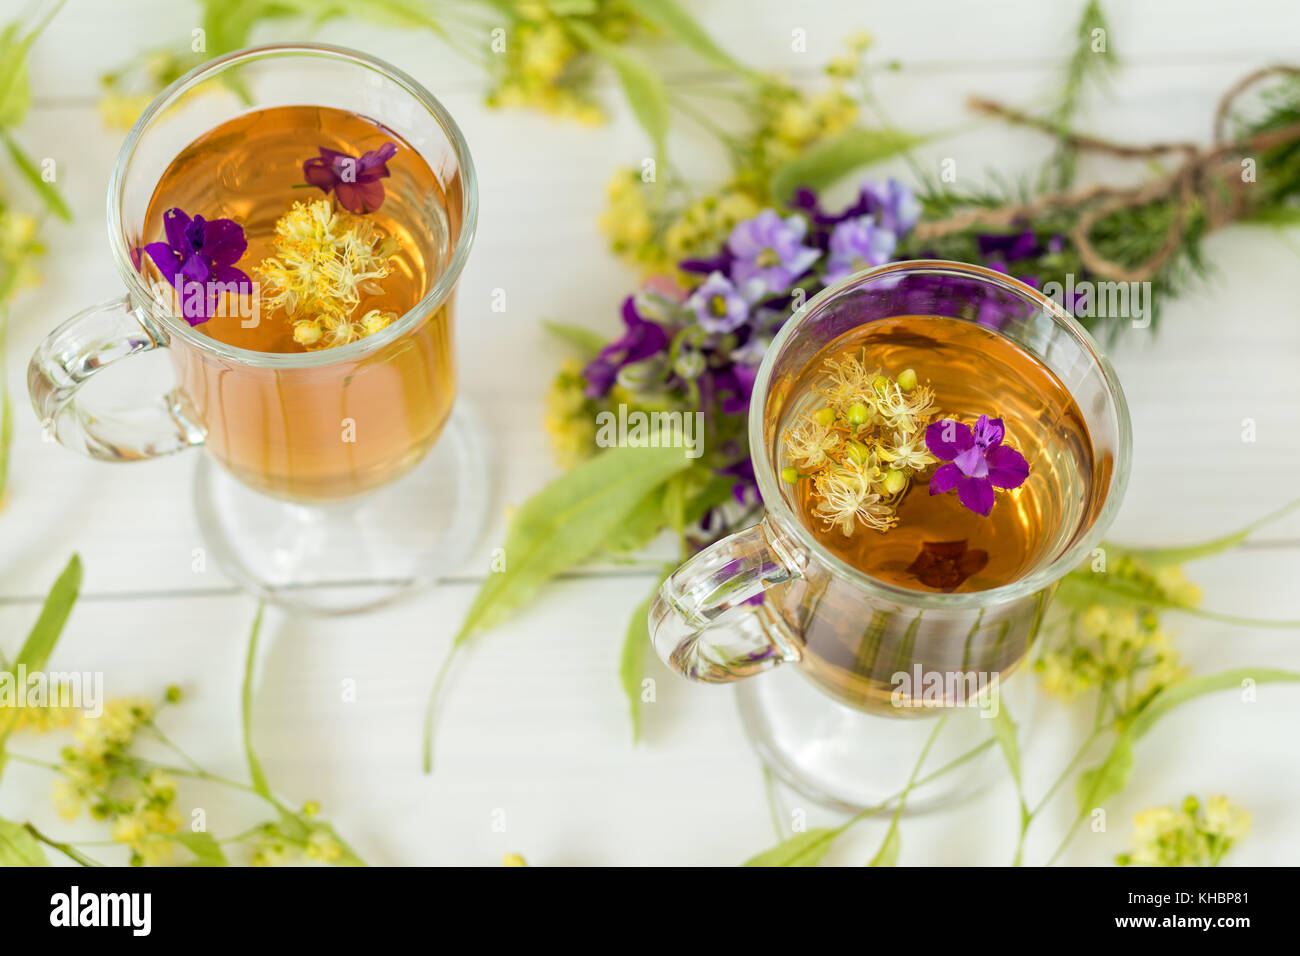 Linden herbal tea in a transparent grog glass with a linden blossom and bunch of herbs on the white wooden surface Stock Photo